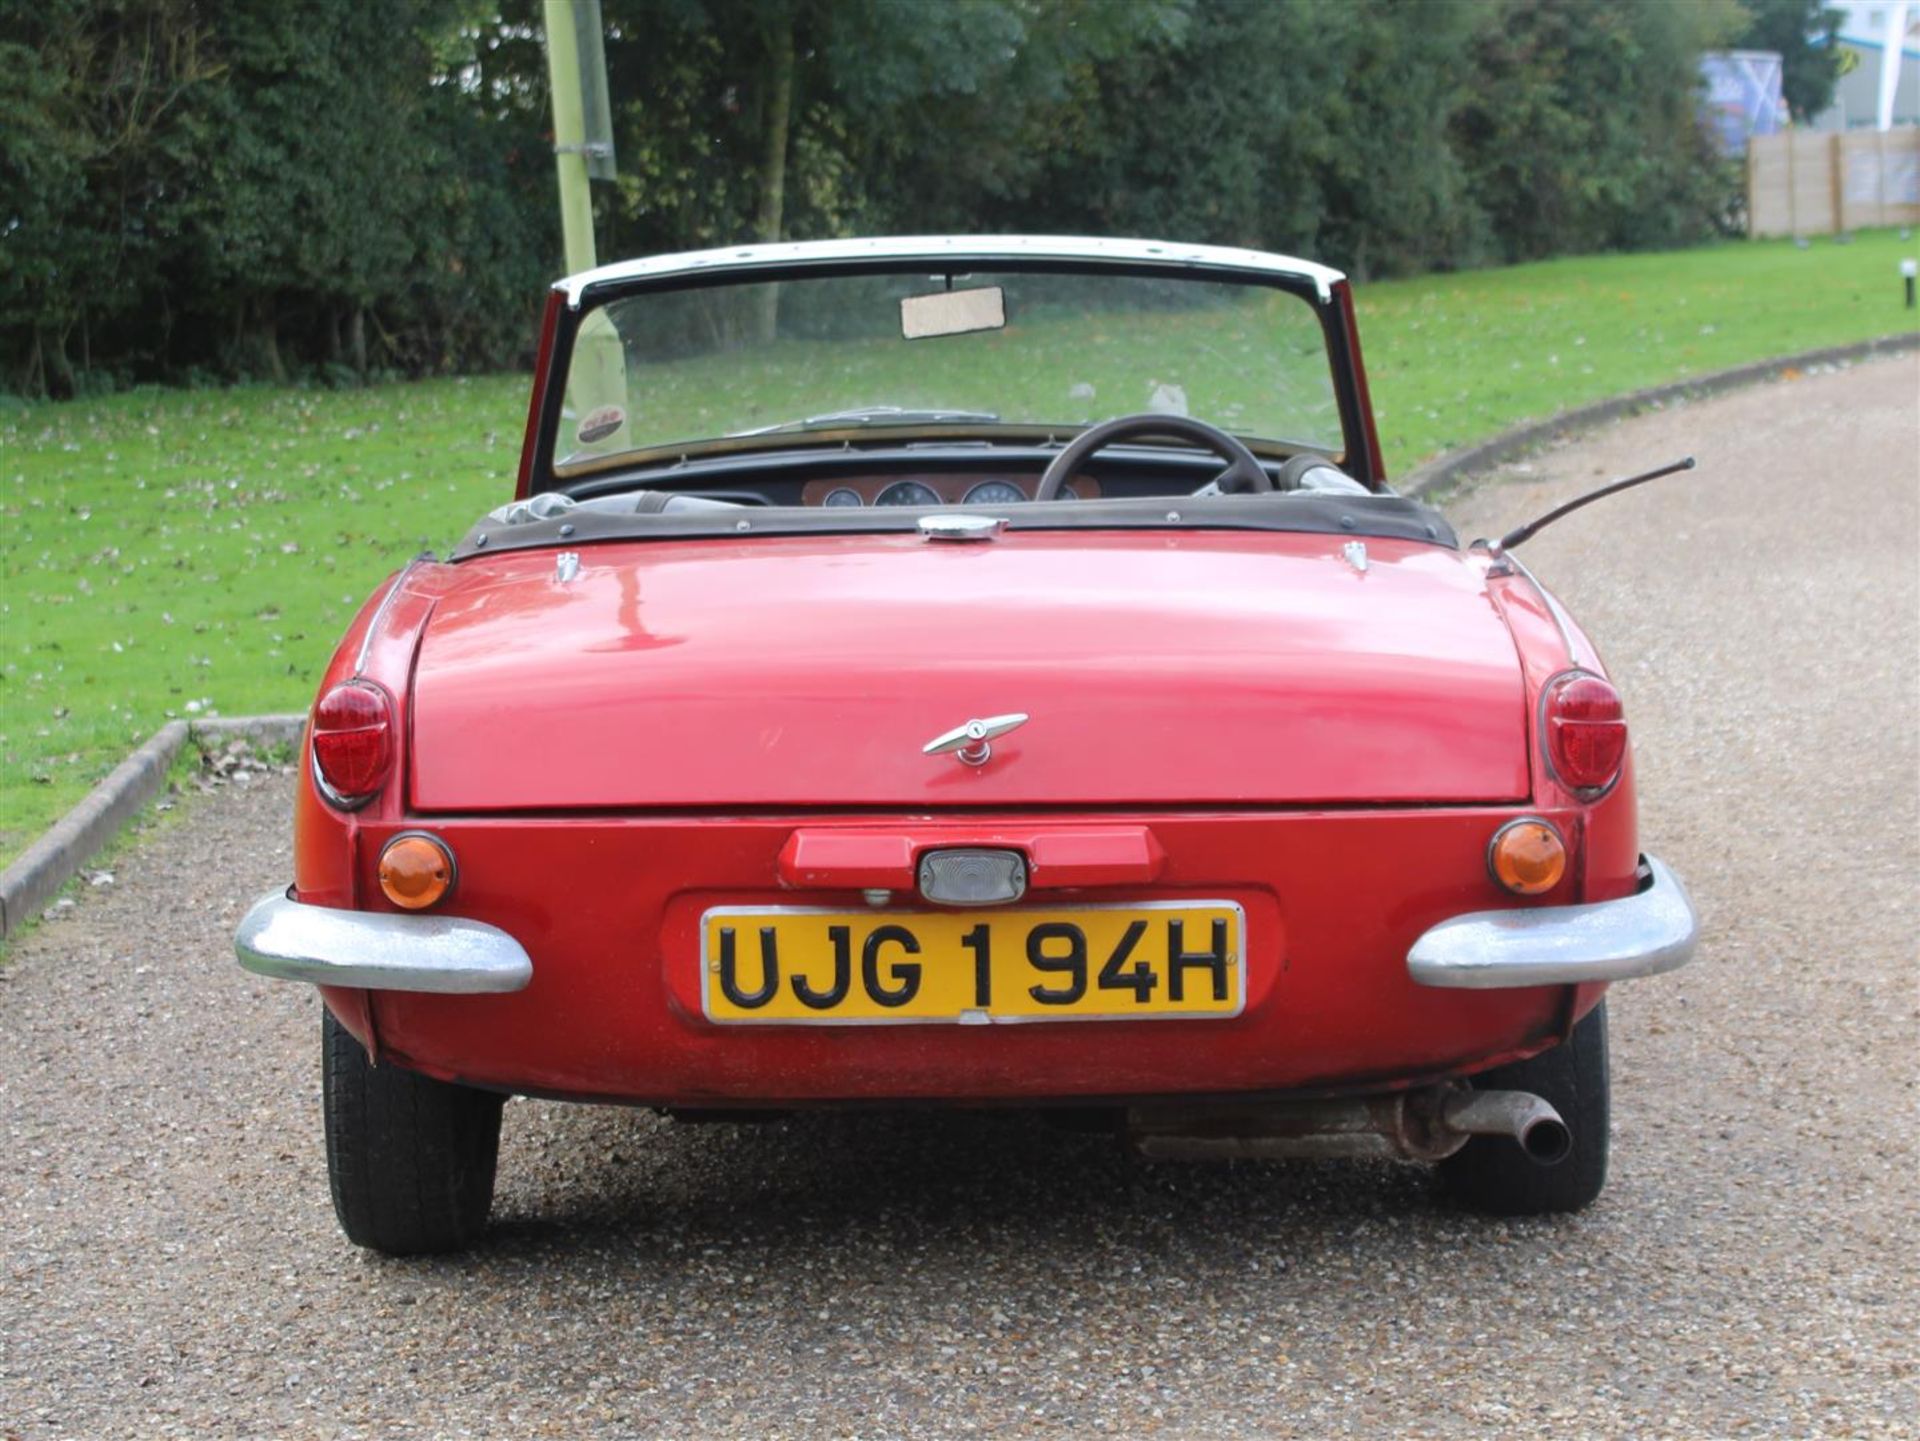 1970 Triumph Spitfire MKIII - Image 3 of 15